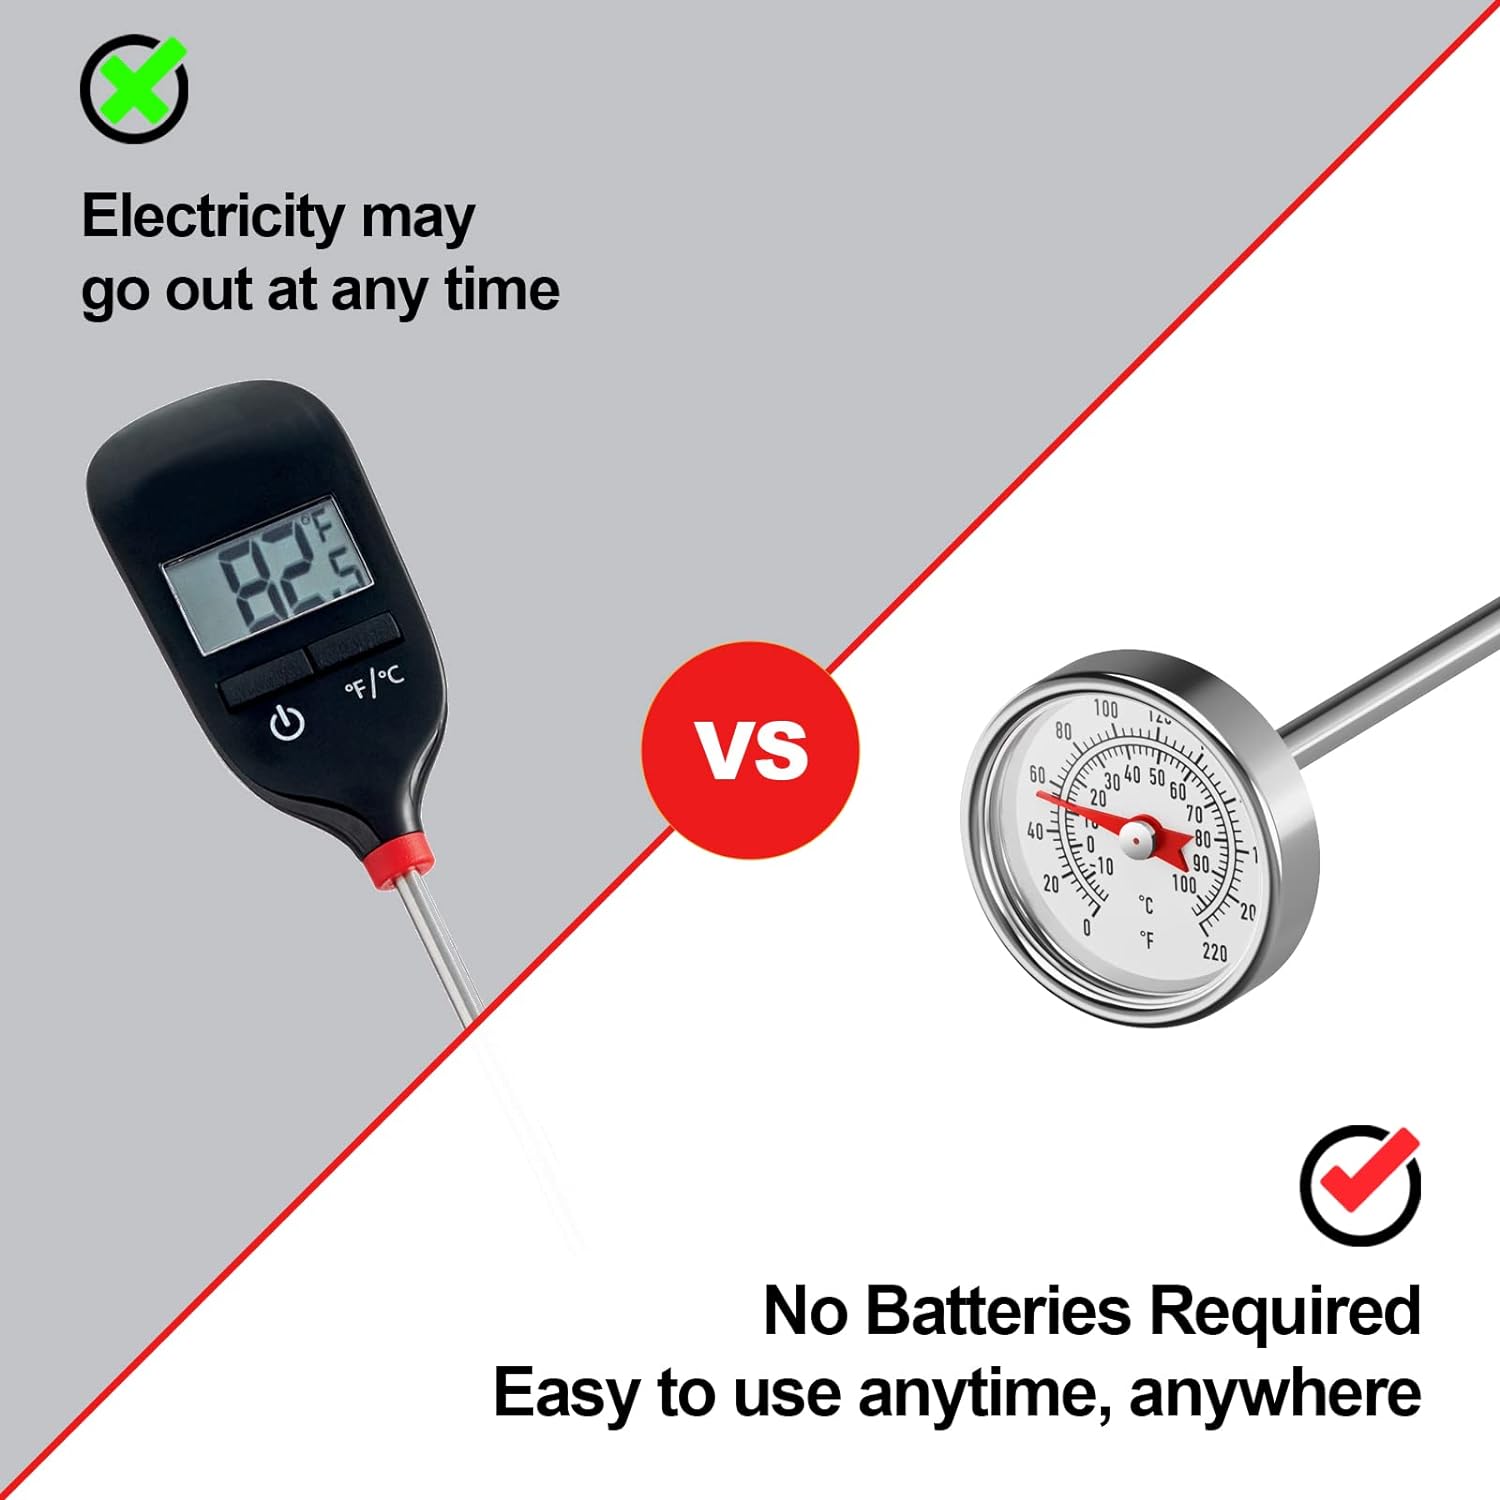 Instant Read Meat Thermometer for Grilling and Cooking, Atimomiao Dial Food Thermometer with 5.5” Probe, Stainless Steel Kitchen Thermometer for Turkey, BBQ, Beef, Milk, Tea, Coffee, Drinks (1-Pcs)